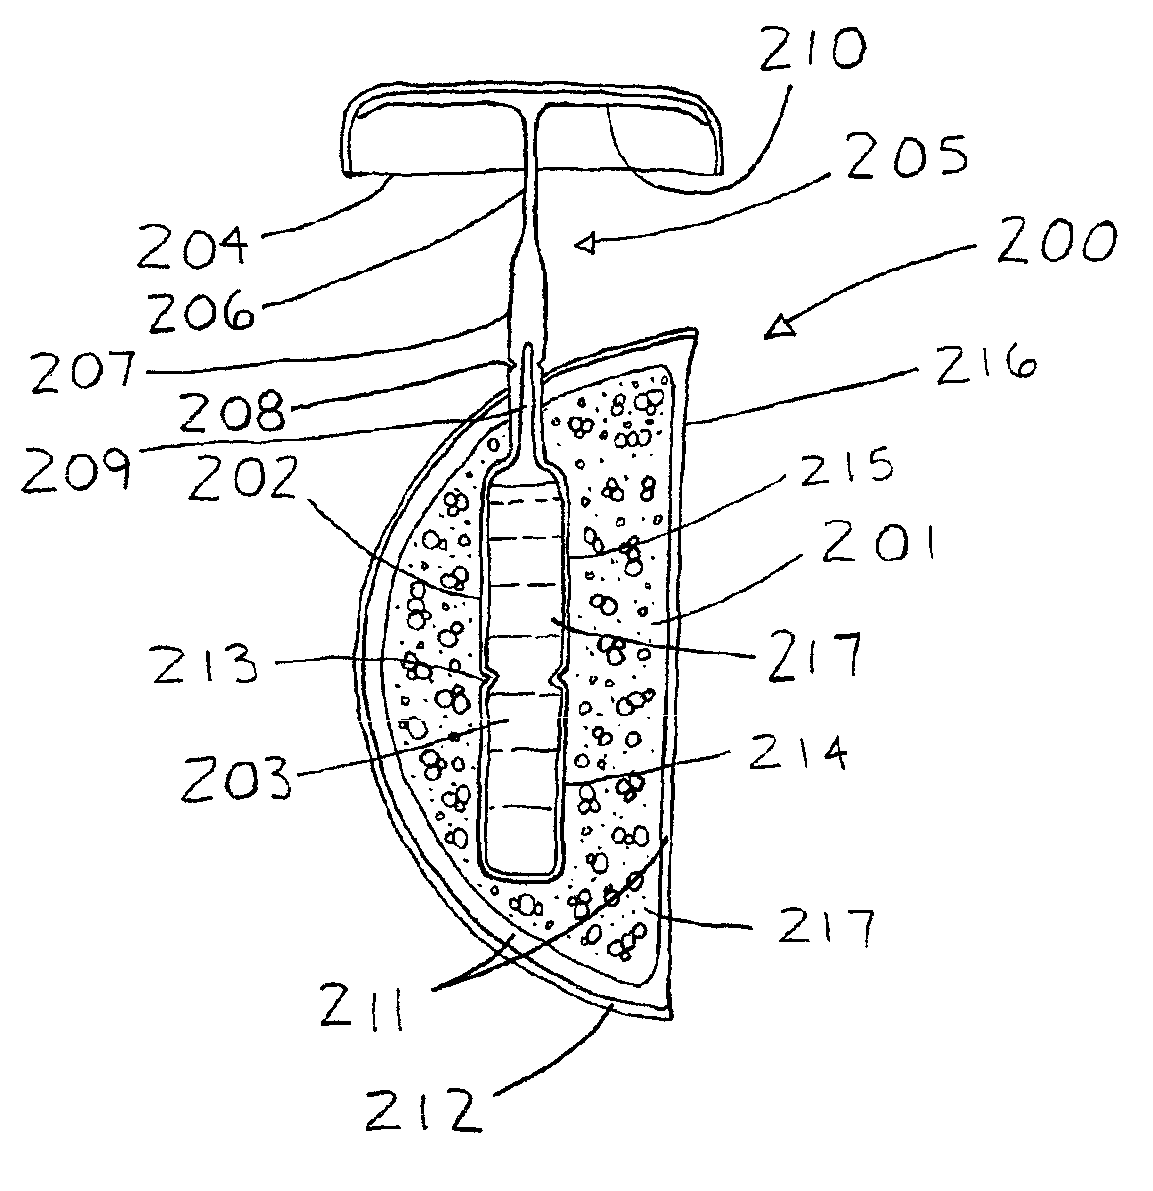 Fruit flavoring in the image of a fruit portion stored with a vessel for flavoring a fluid